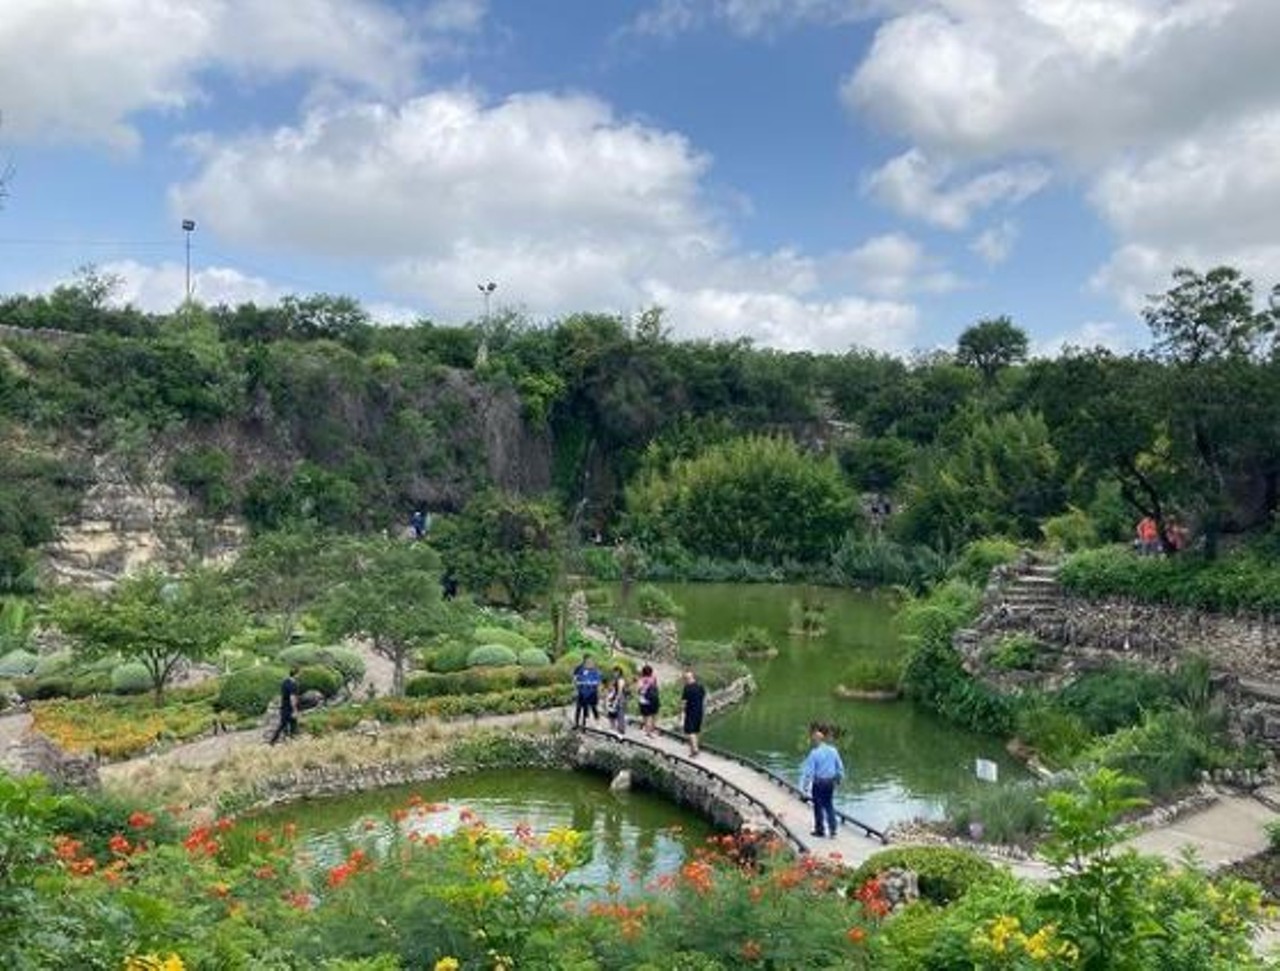 Catch some fresh air at the Japanese Tea Garden
3853 N St Mary's St, (210) 212-4814, sanantonio.gov
Not only do the gardens offer a scenic spot to relax on a summer afternoon, they’re also completely free to the public.
Photo via Instagram / tranquilo57_